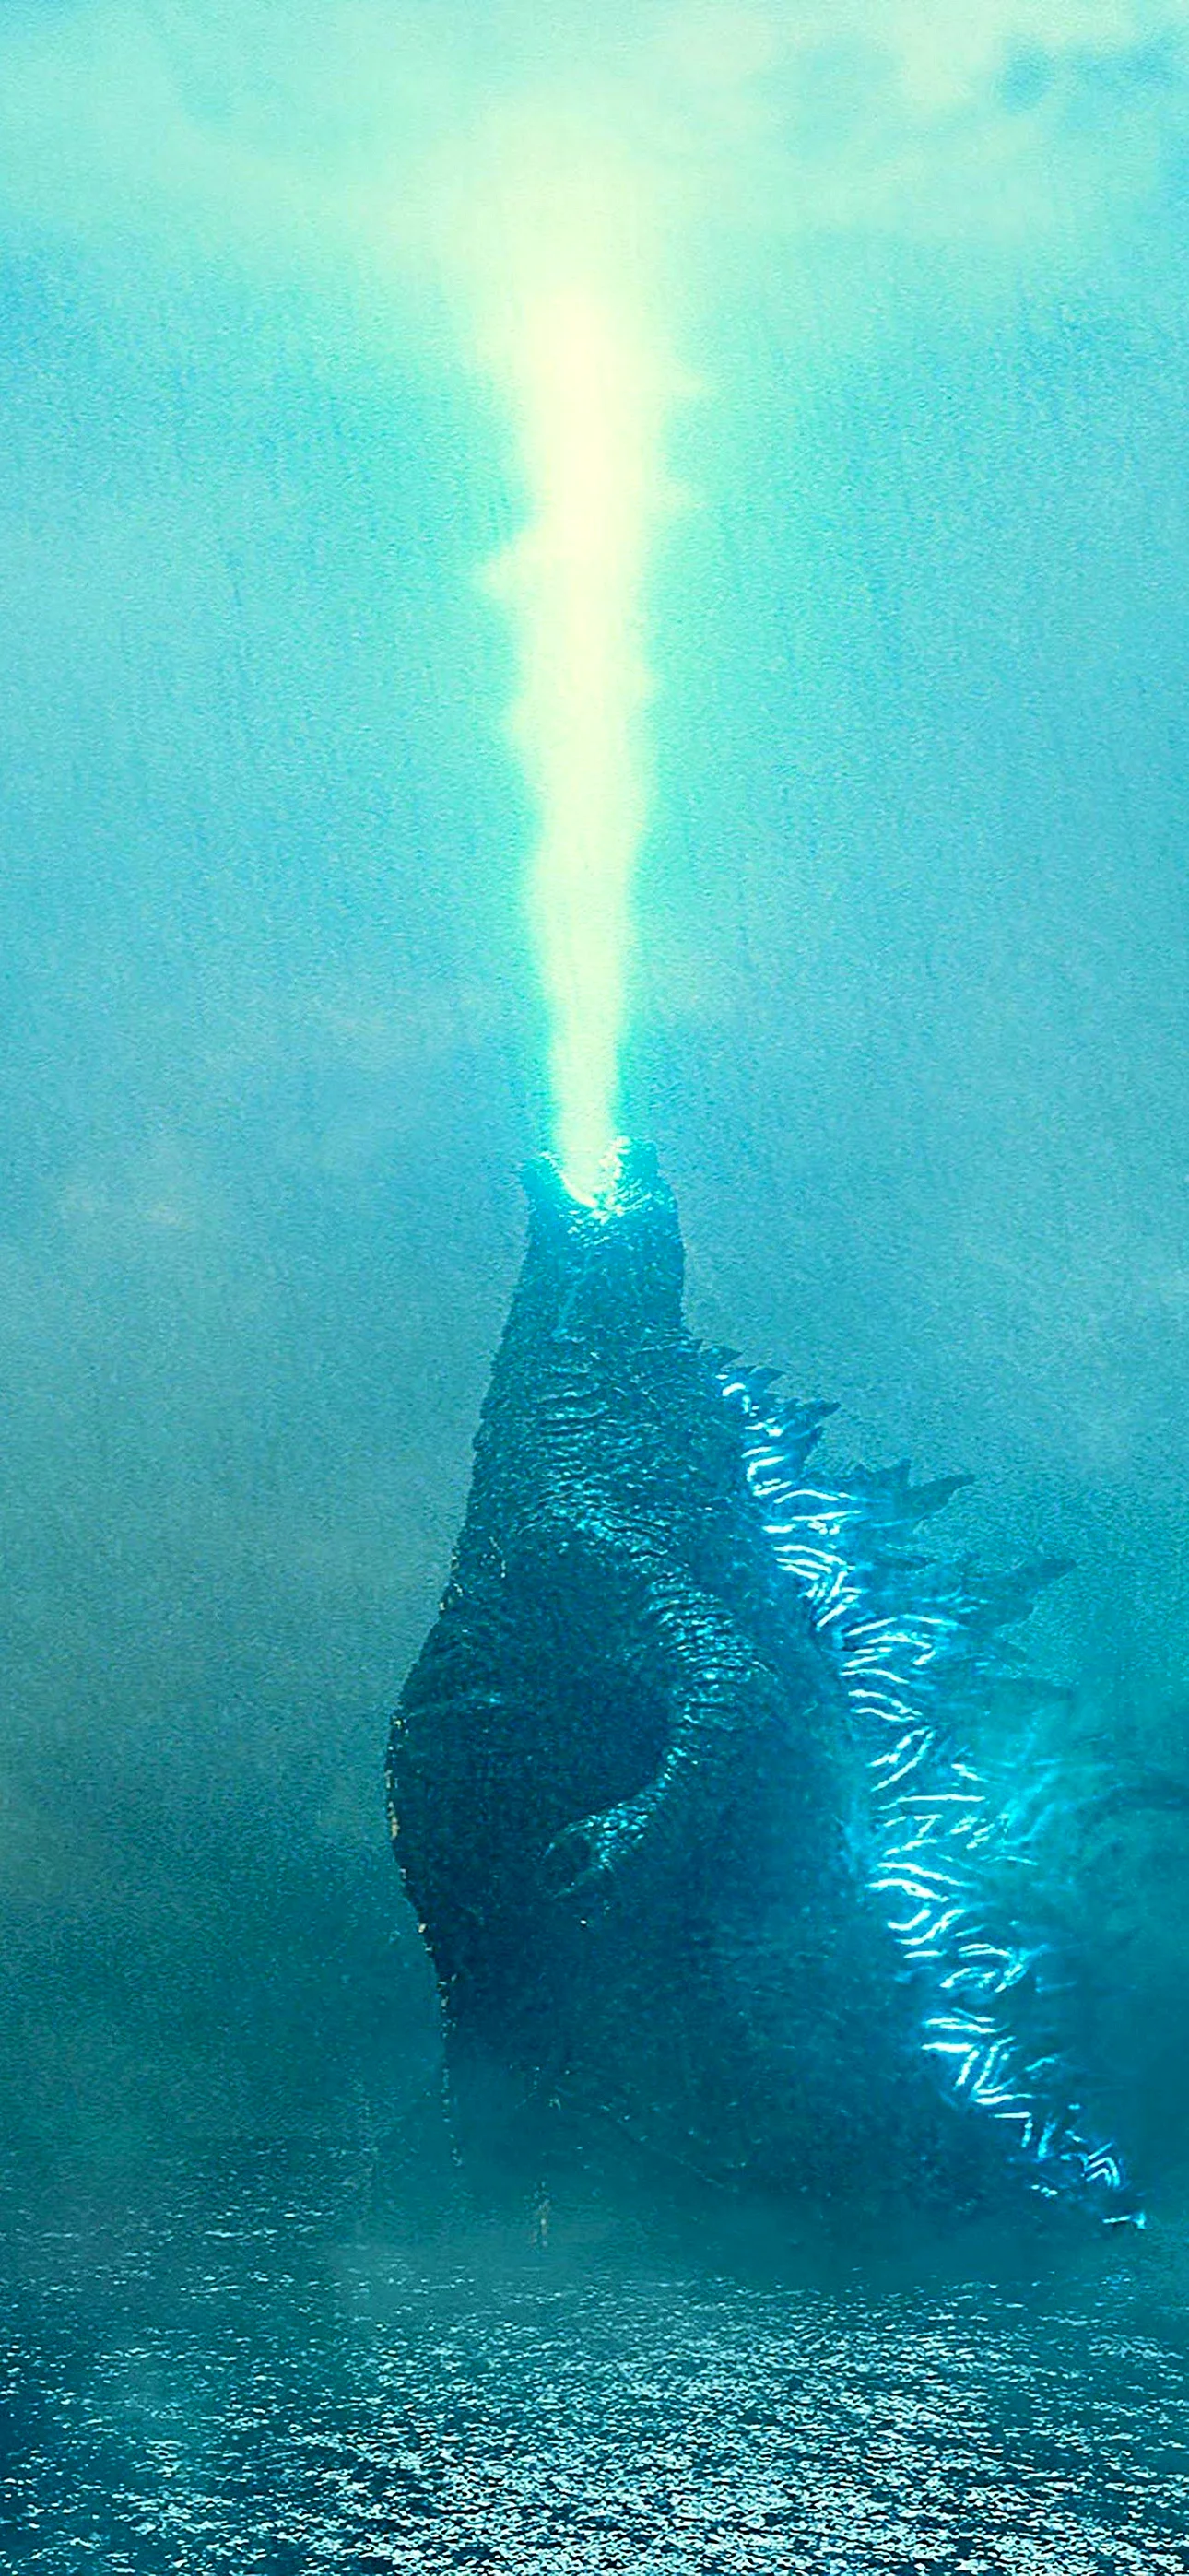 Godzilla King Of The Monsters 2019 Wallpaper For iPhone